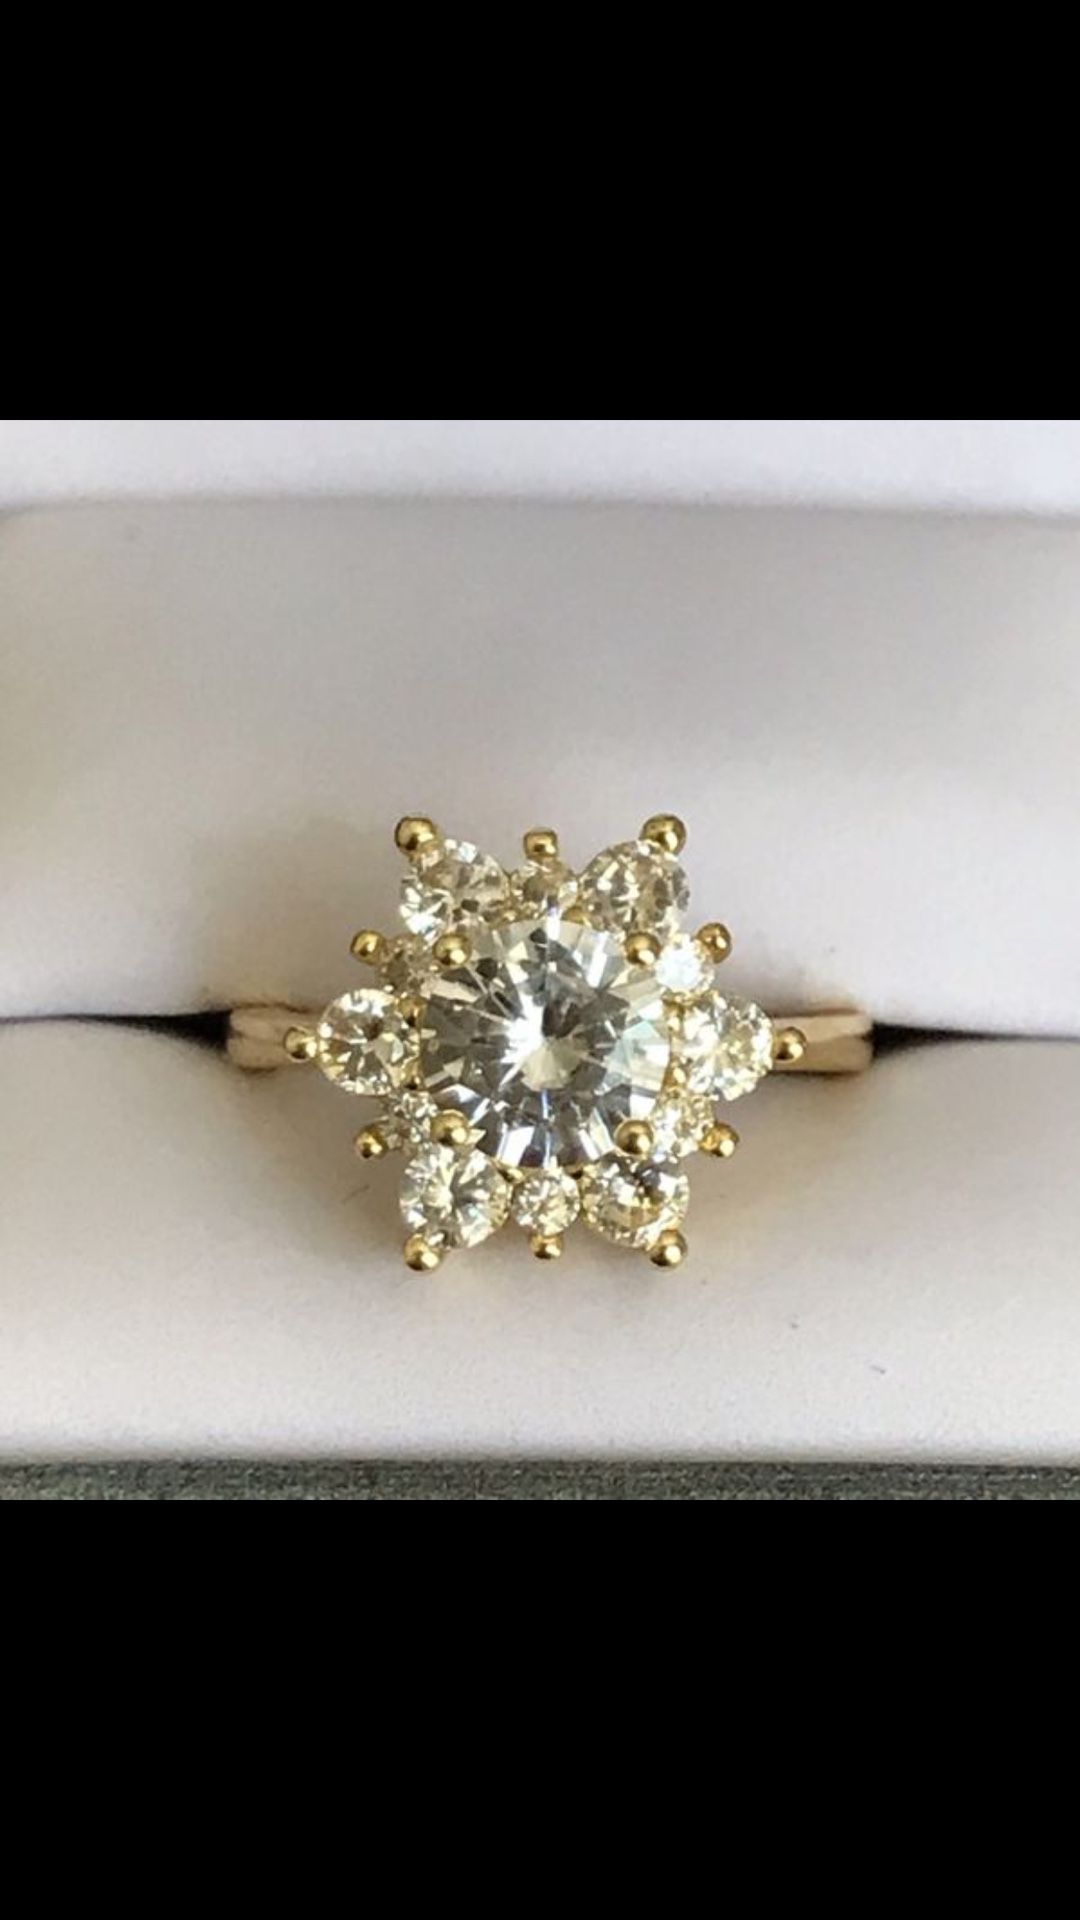 Gold plated white topaz snowflake ring women’s jewelry accessory sz 6